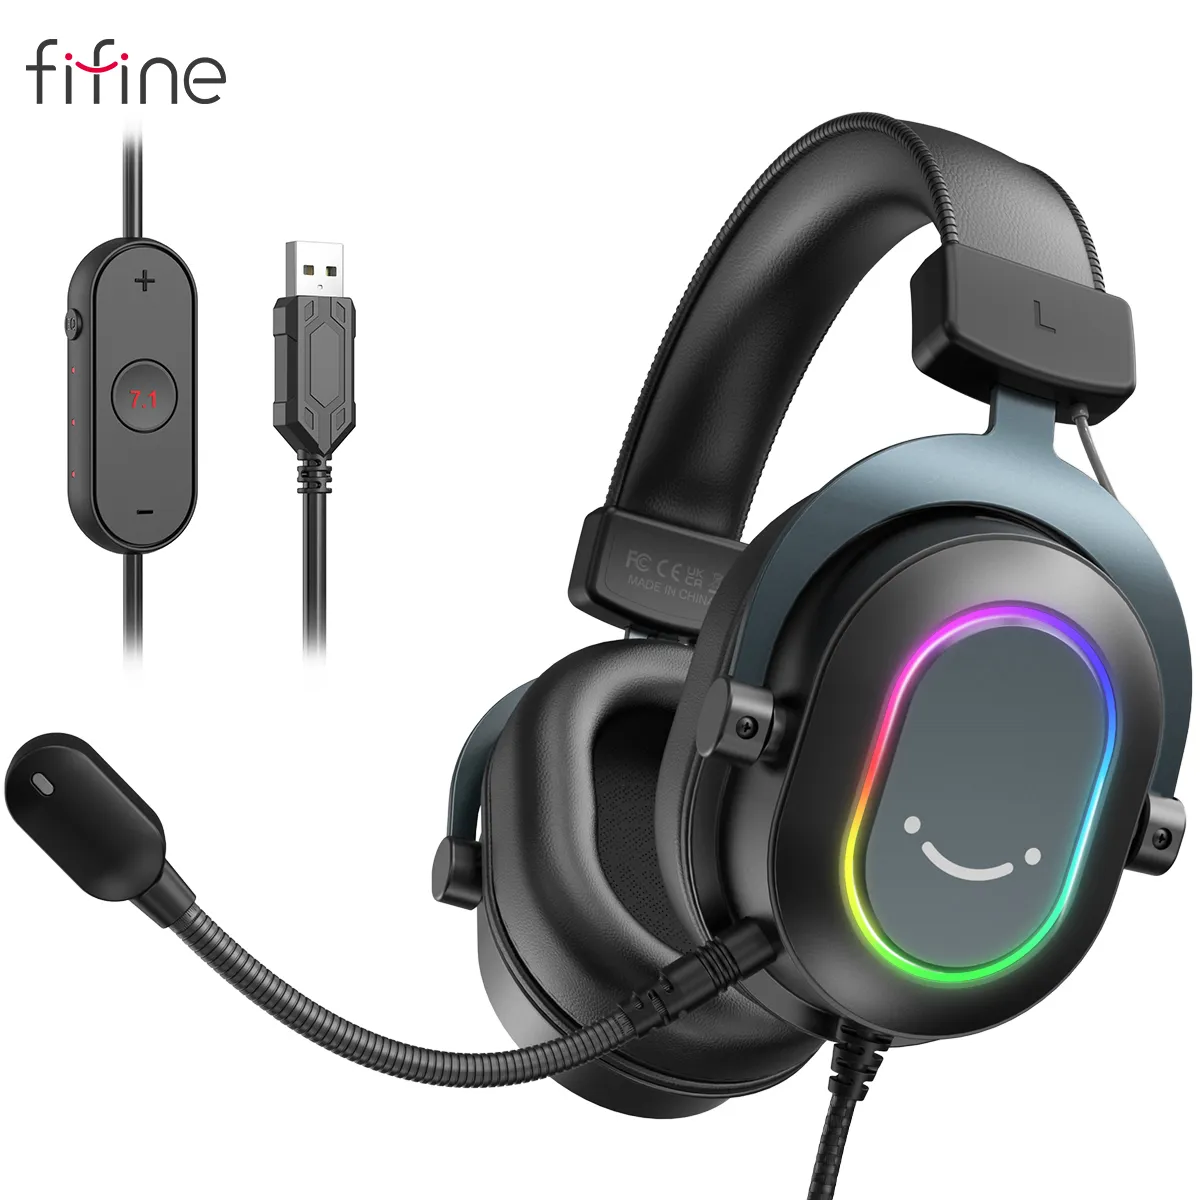 Koken Gronden gordijn Fifine Dynamic RGB Gaming Headset with Mic Over-Ear Headphones 7.1 Surround  Sound PC PS4 PS5 3 EQ Options Game Movie Music